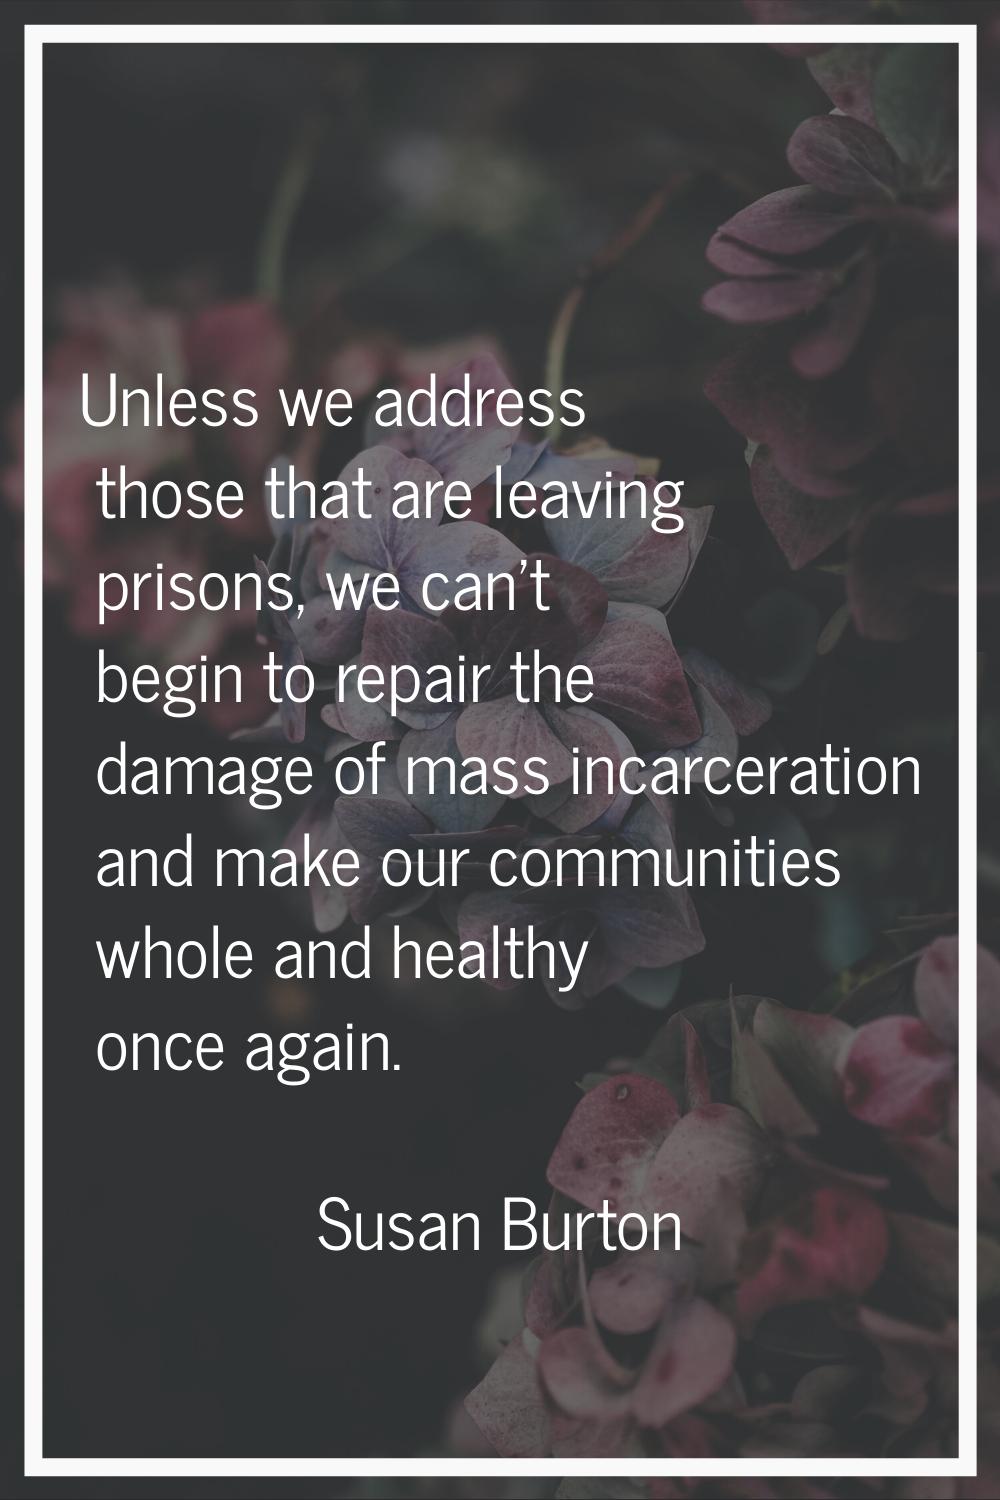 Unless we address those that are leaving prisons, we can't begin to repair the damage of mass incar